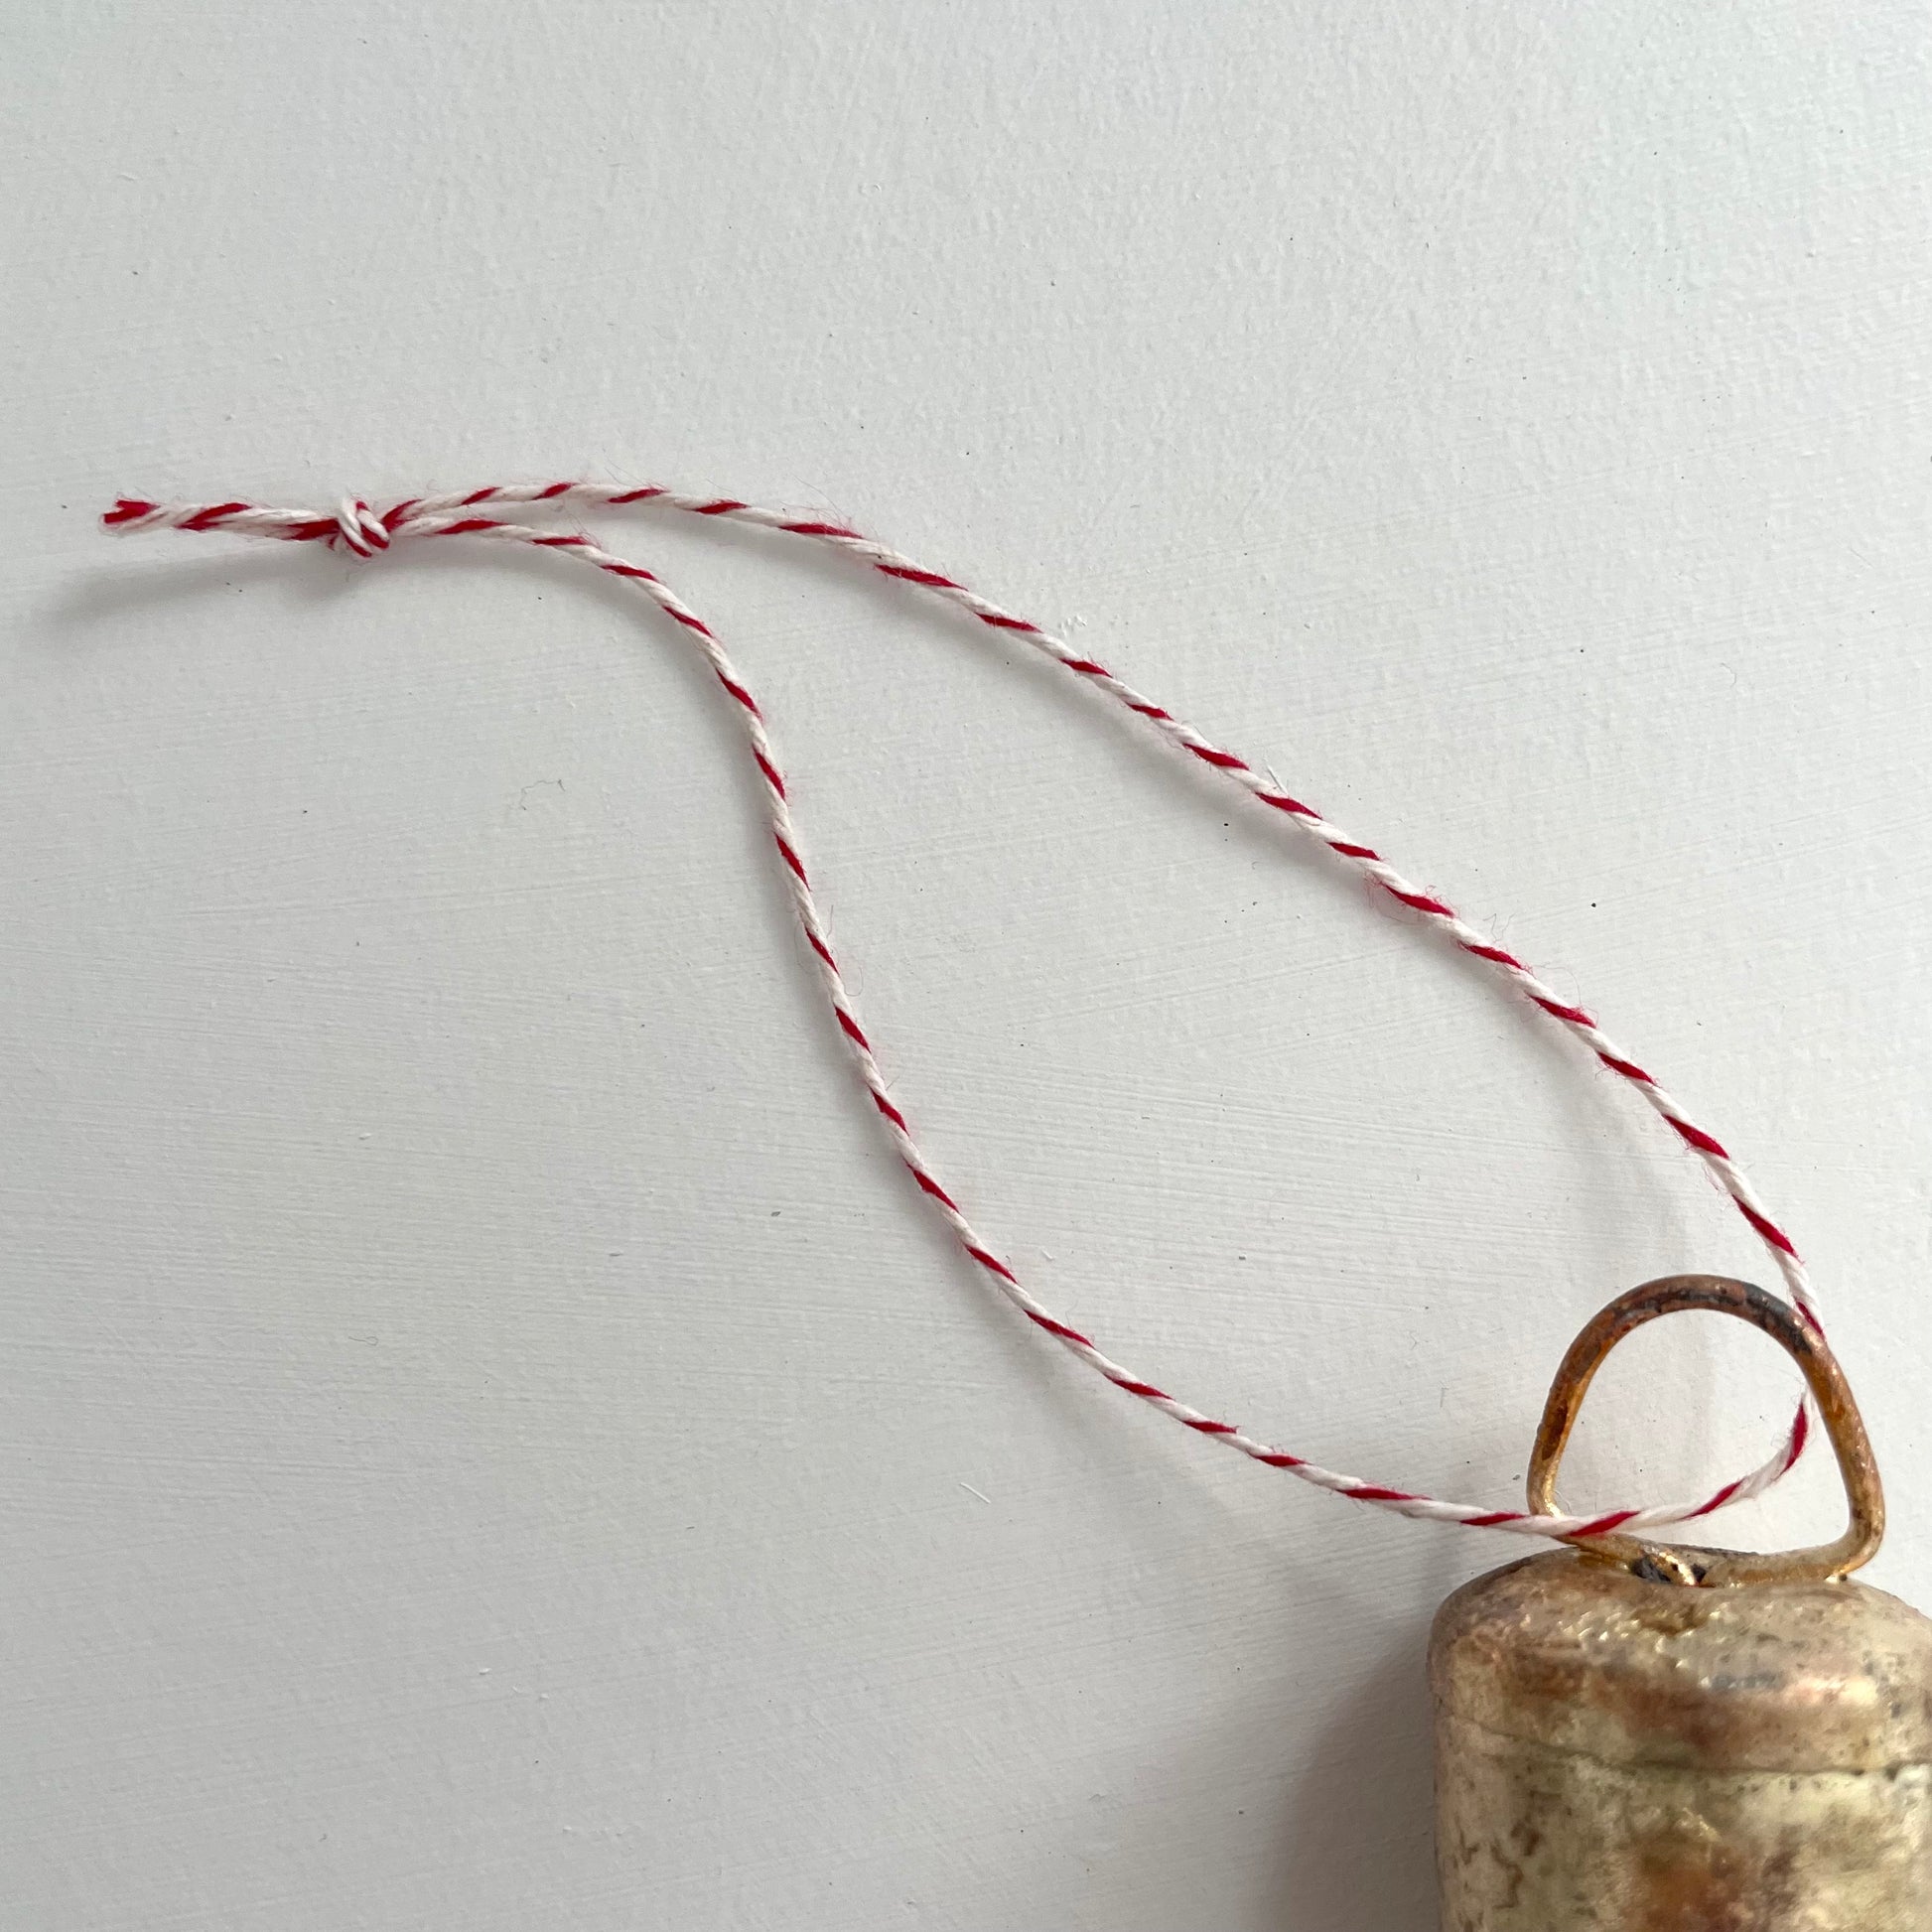 1 3/4 inch flat top tin bell with brass finish strung on twine suede and jute to make an ornament with red and white striped twine